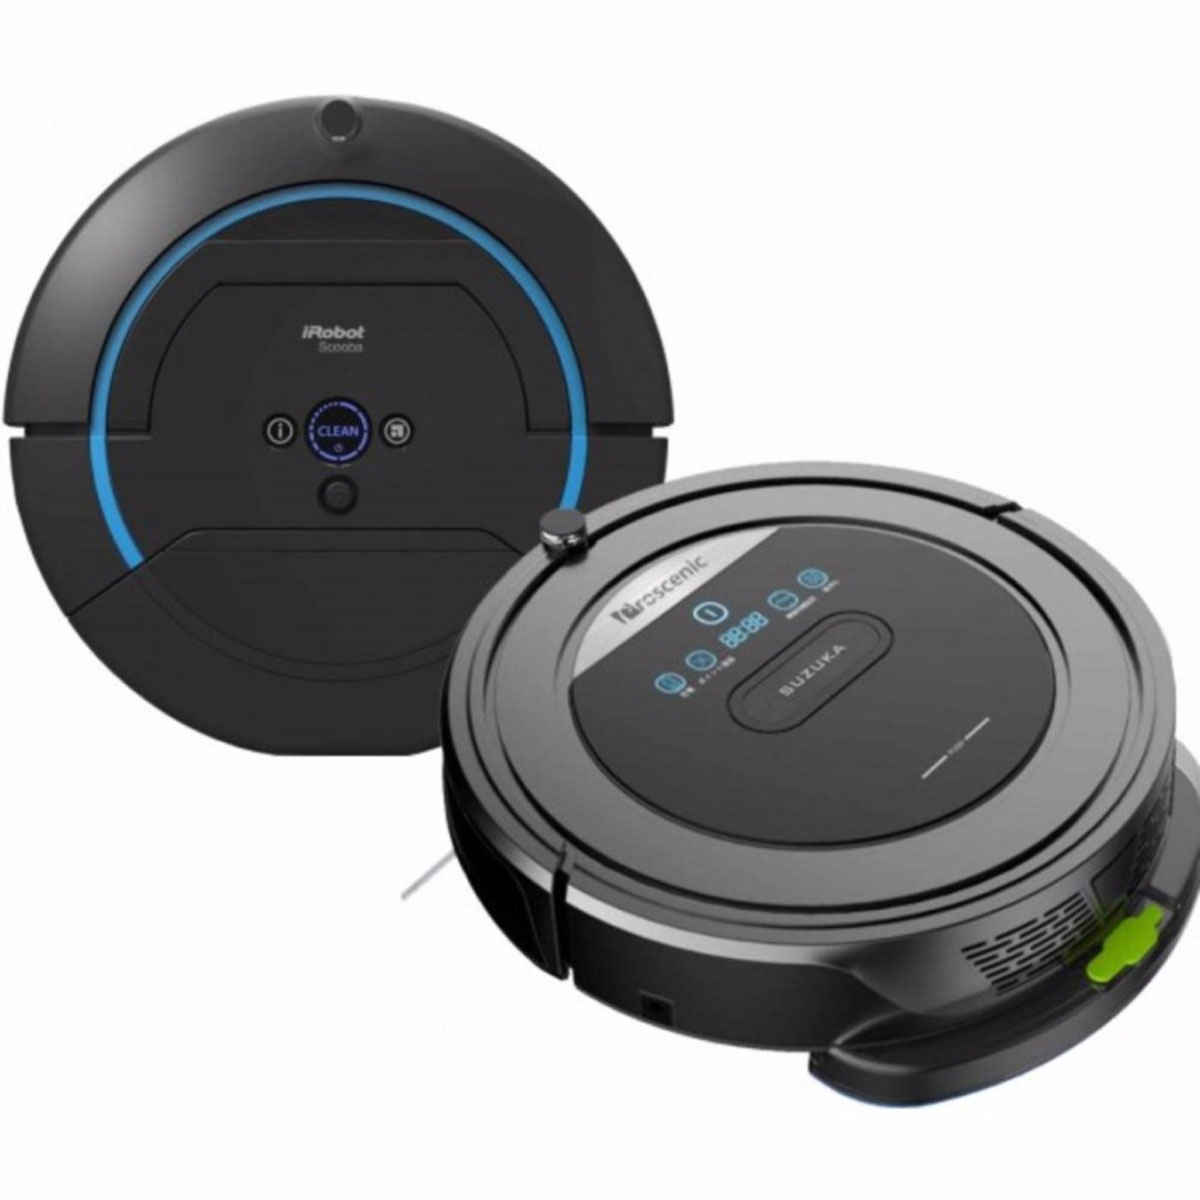 Proscenic robot vacuum with water tank 5 in 1 1487558447 70678721 8669a822ffac36a5fb9dc9f34f185466 zoom